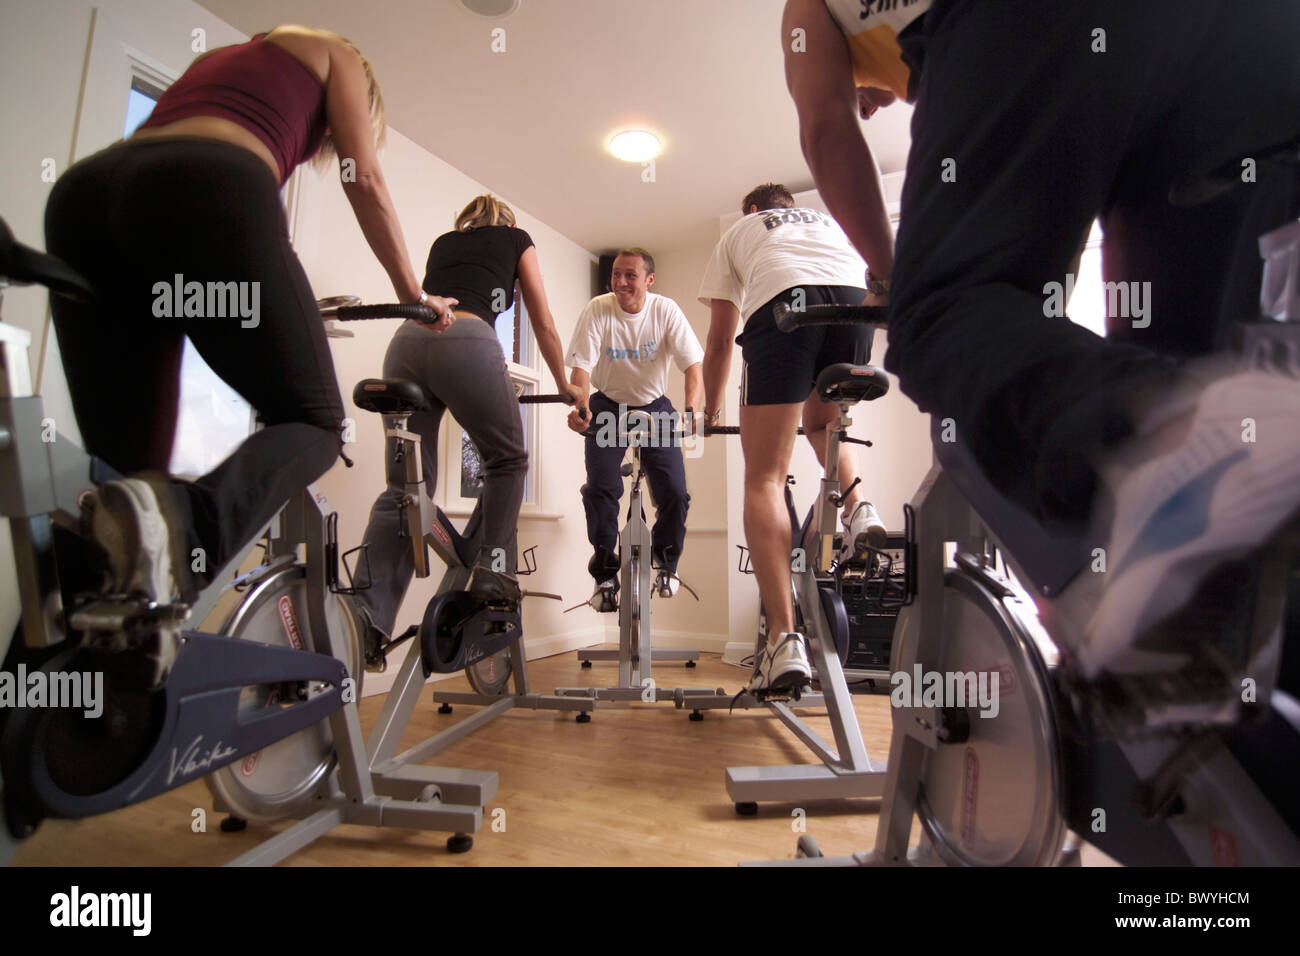 appliances bicycle bike coaches devices Ergometer Fitness fitness studio folks group health home coach i Stock Photo